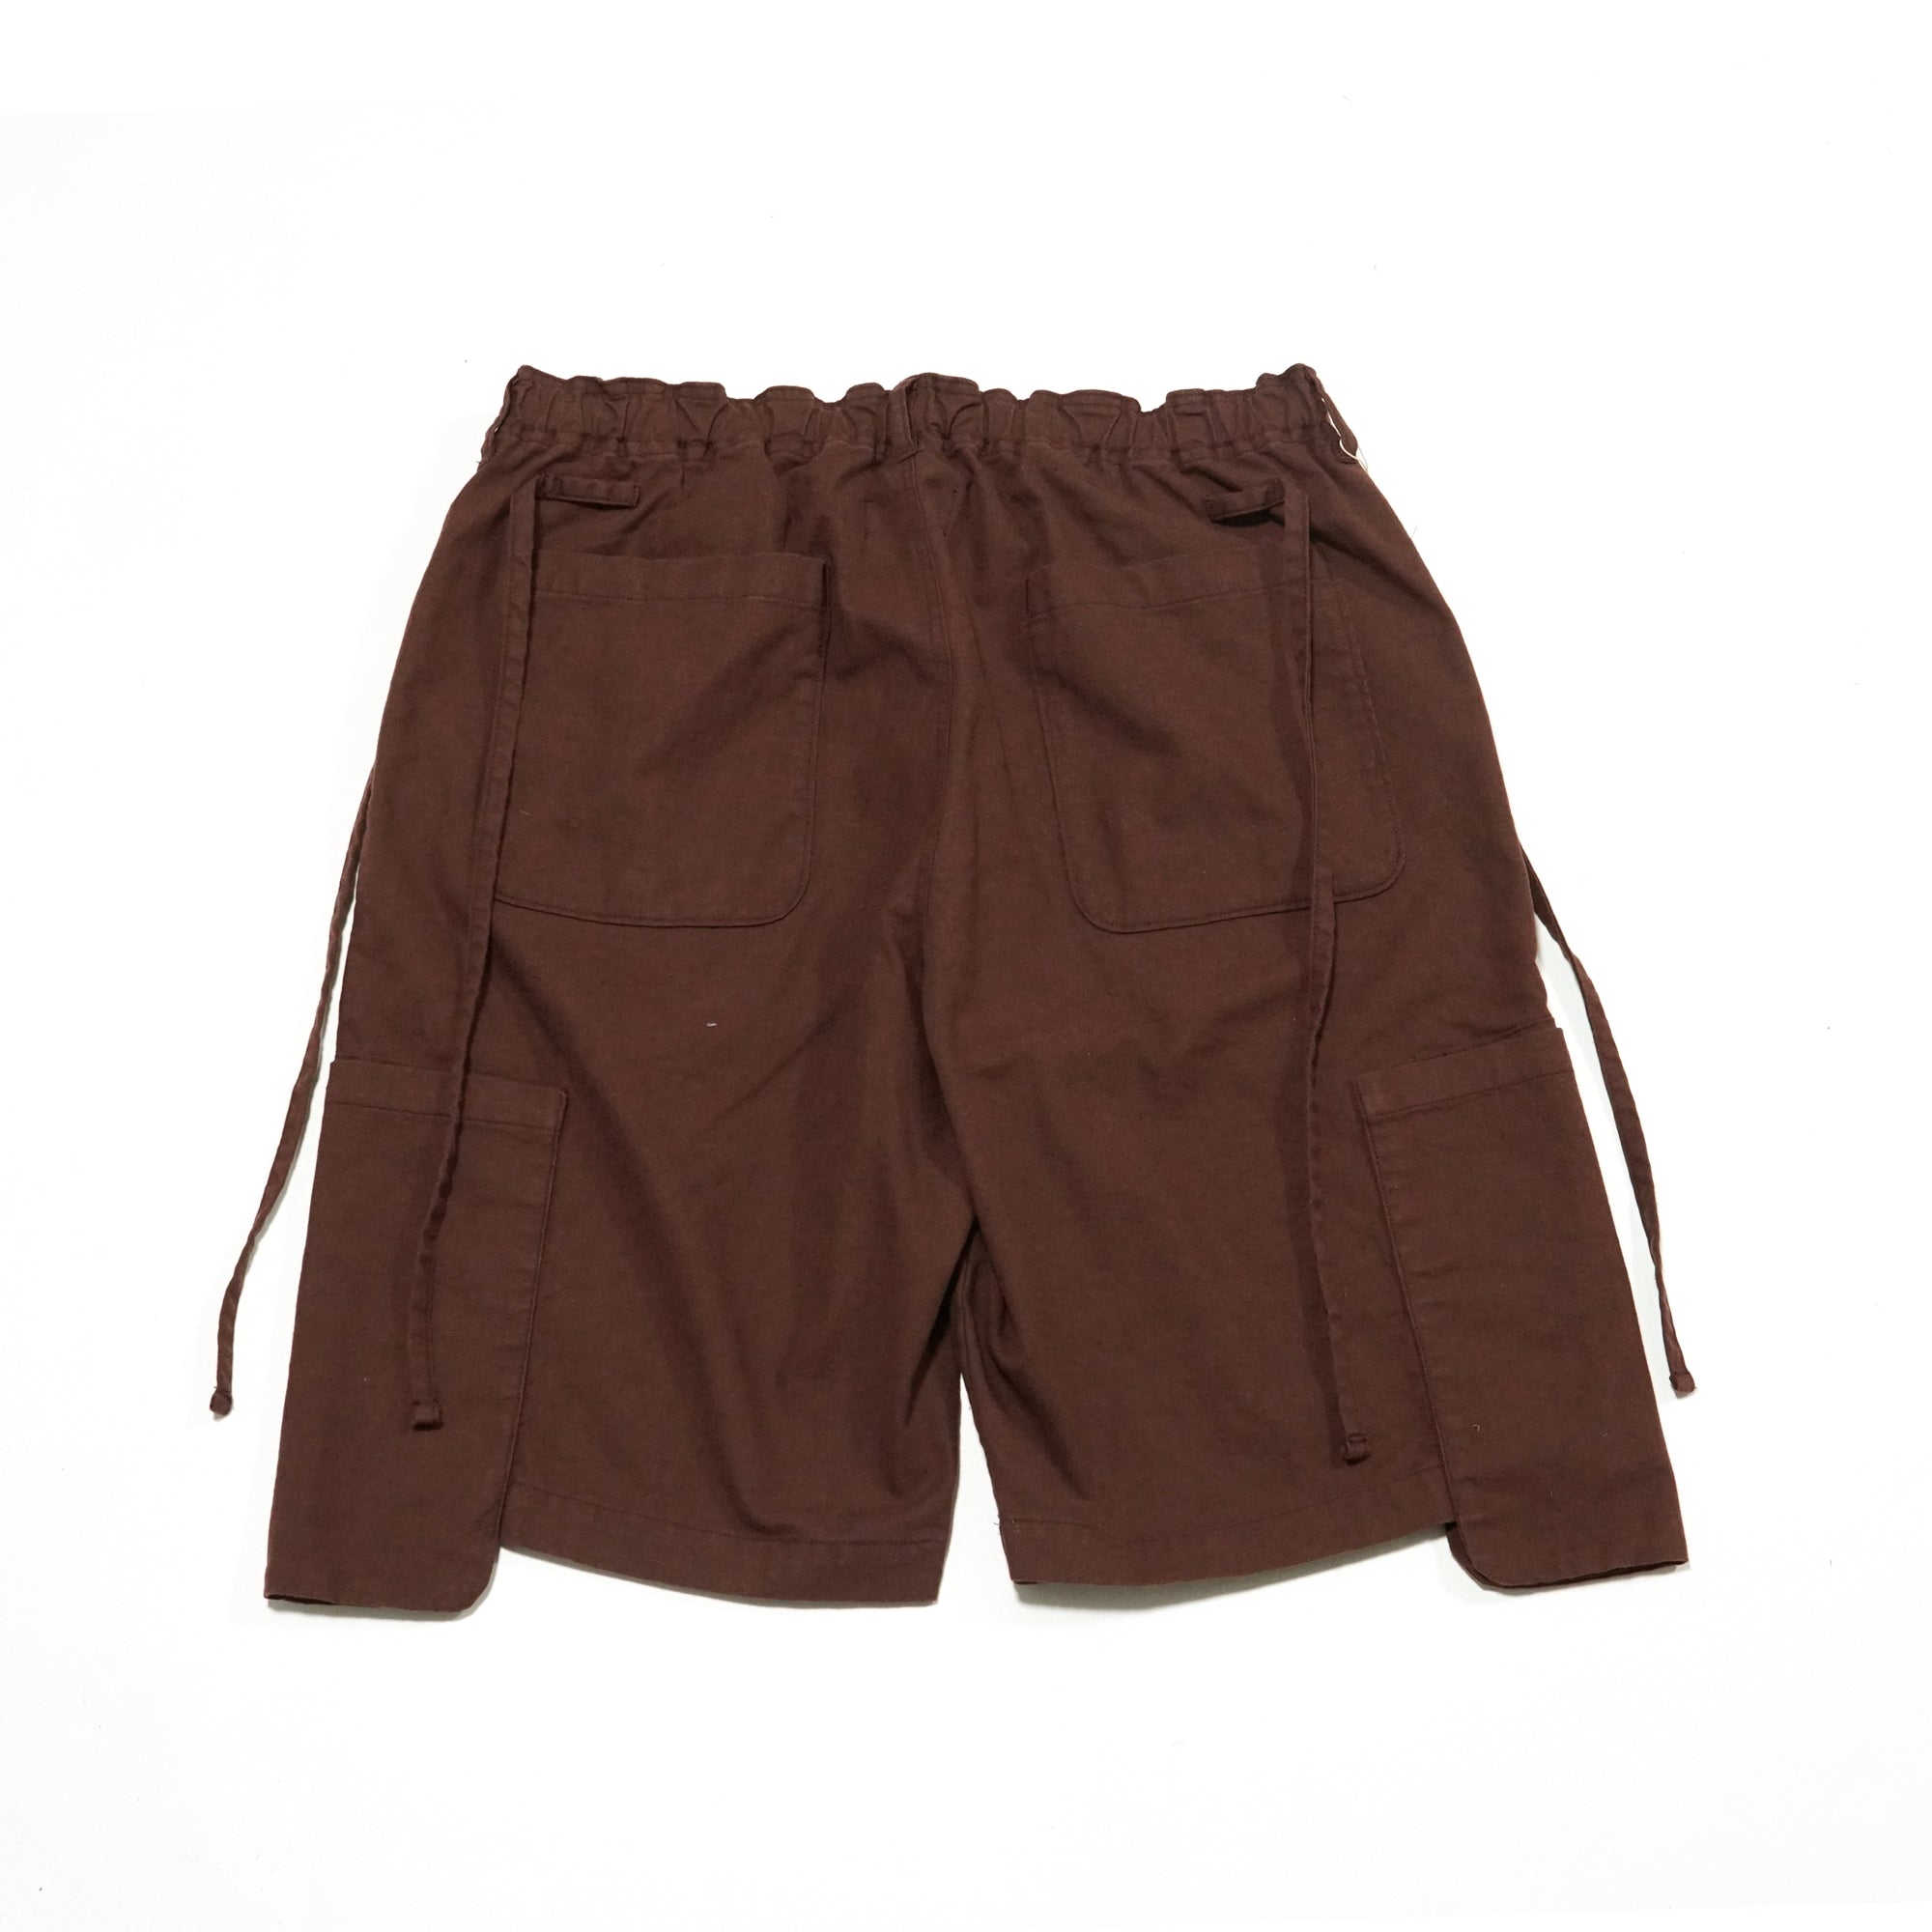 No:VOO-1093 | Name:Tricky Cargo | Color:Coffee【VOO_ヴォー】